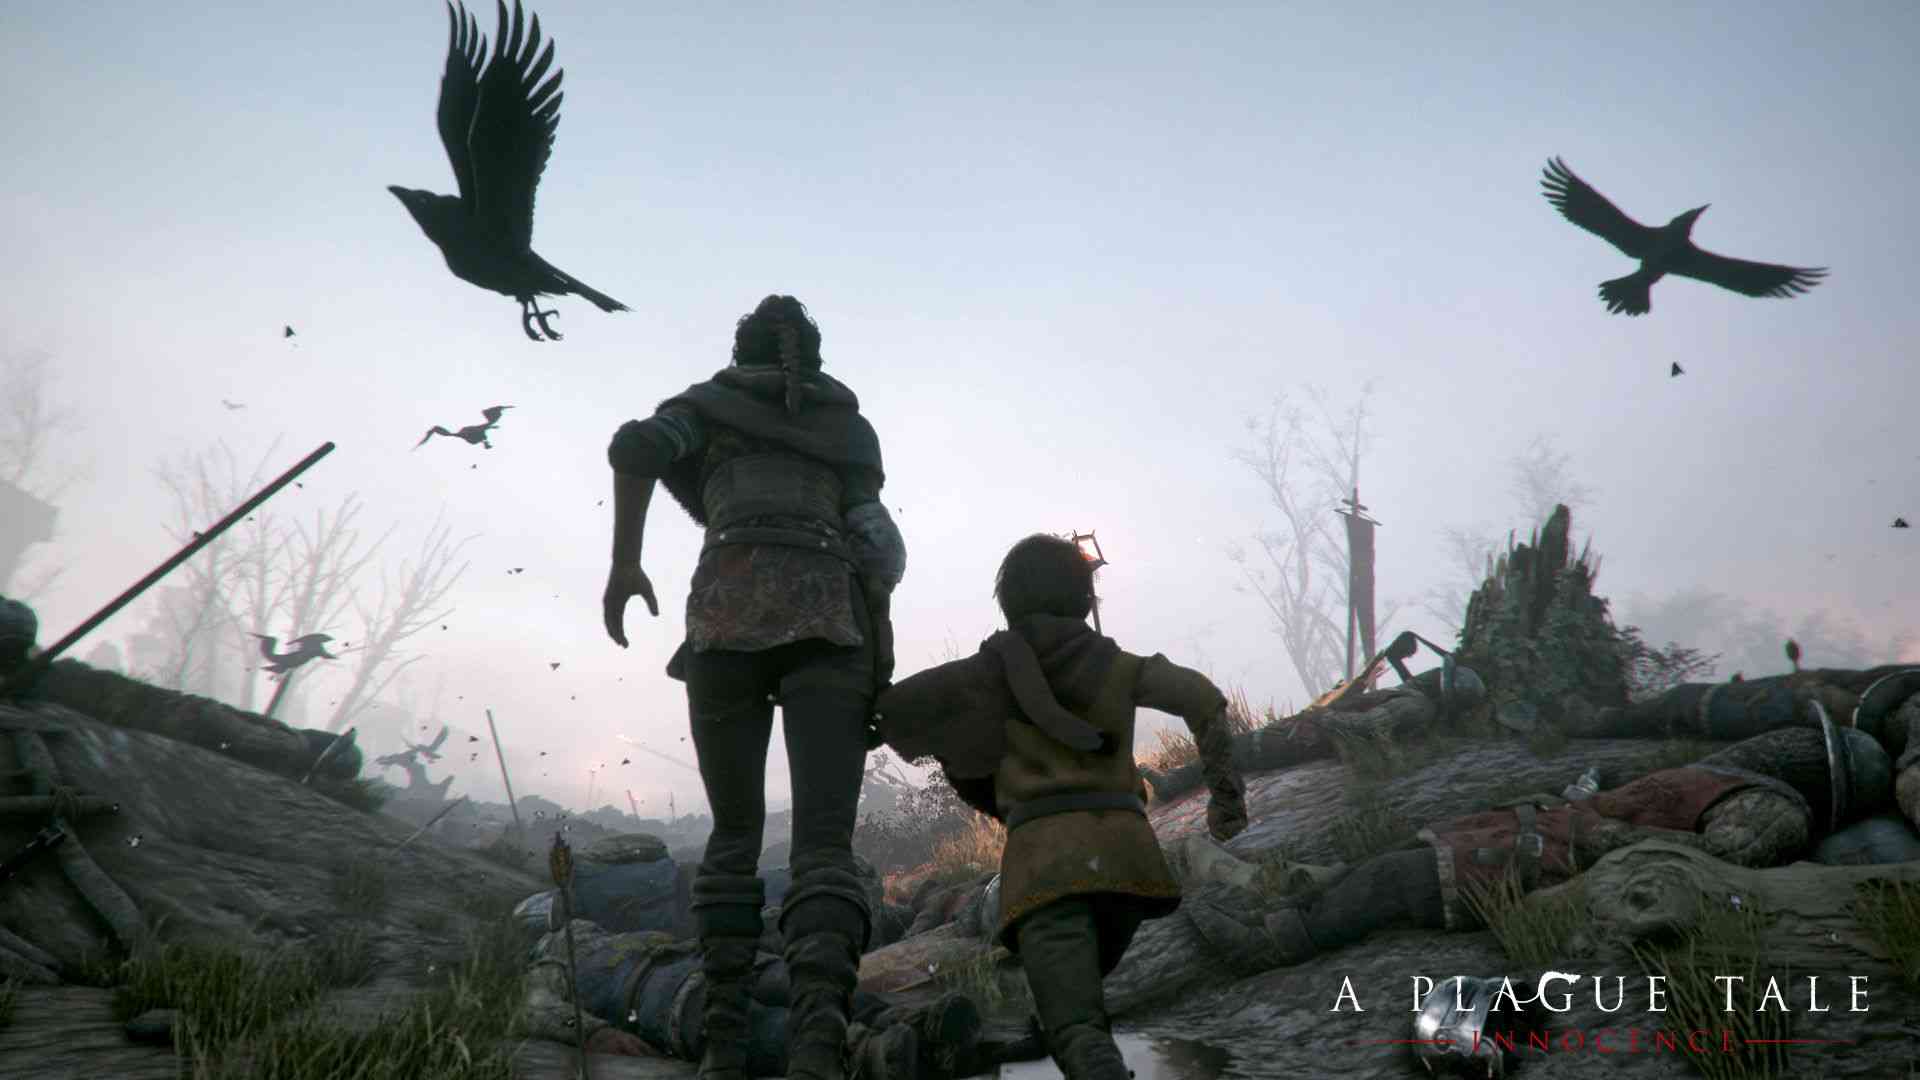 the new trailer tells the story of a plague tale innocence 1804 big 1